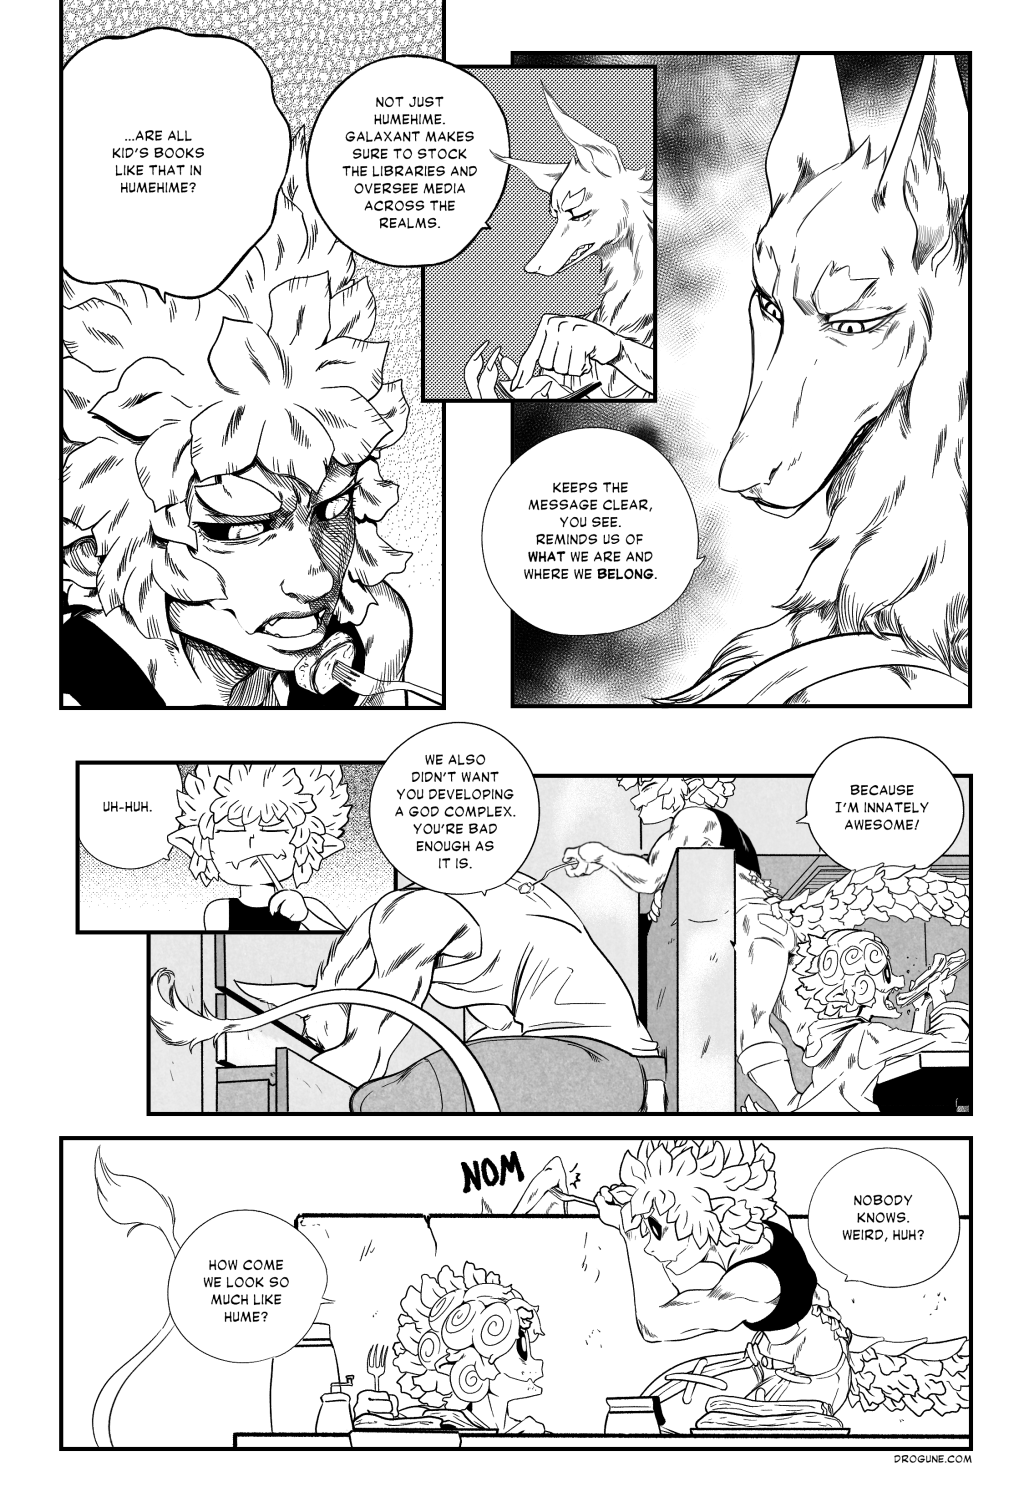 Book I • Page 40